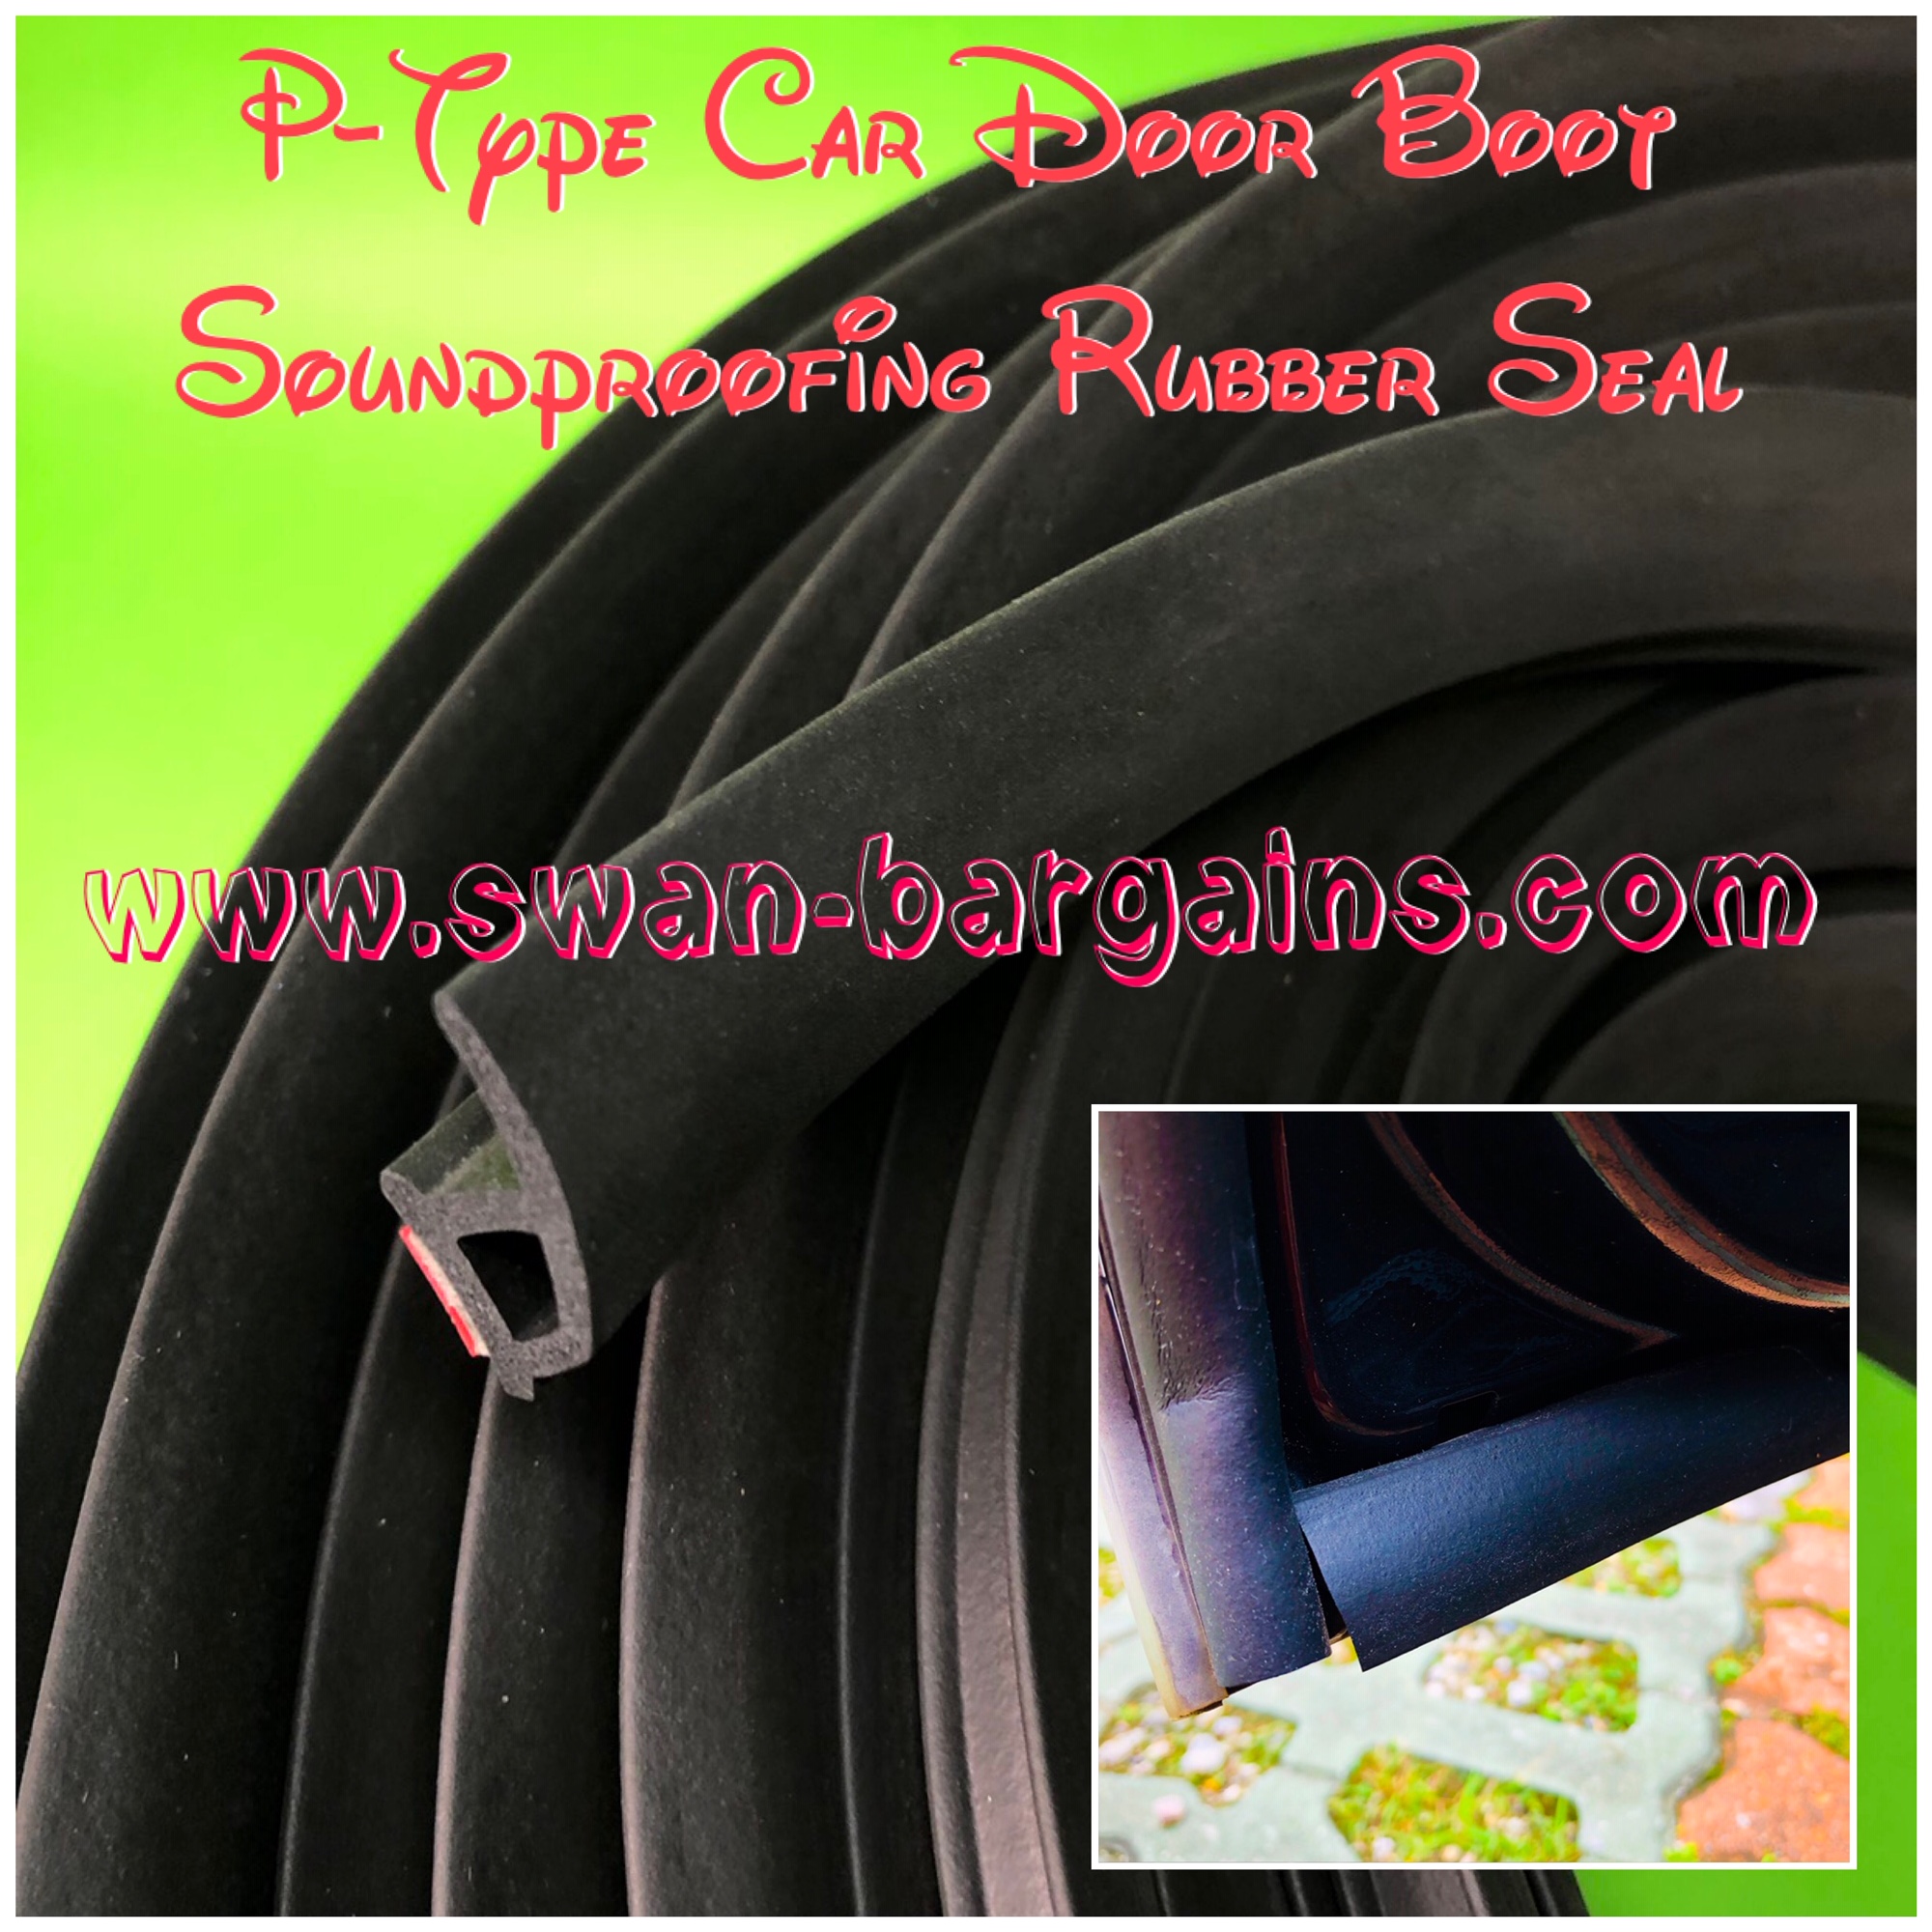 Universal P Type Car Soundproof Rubber Seal Singapore